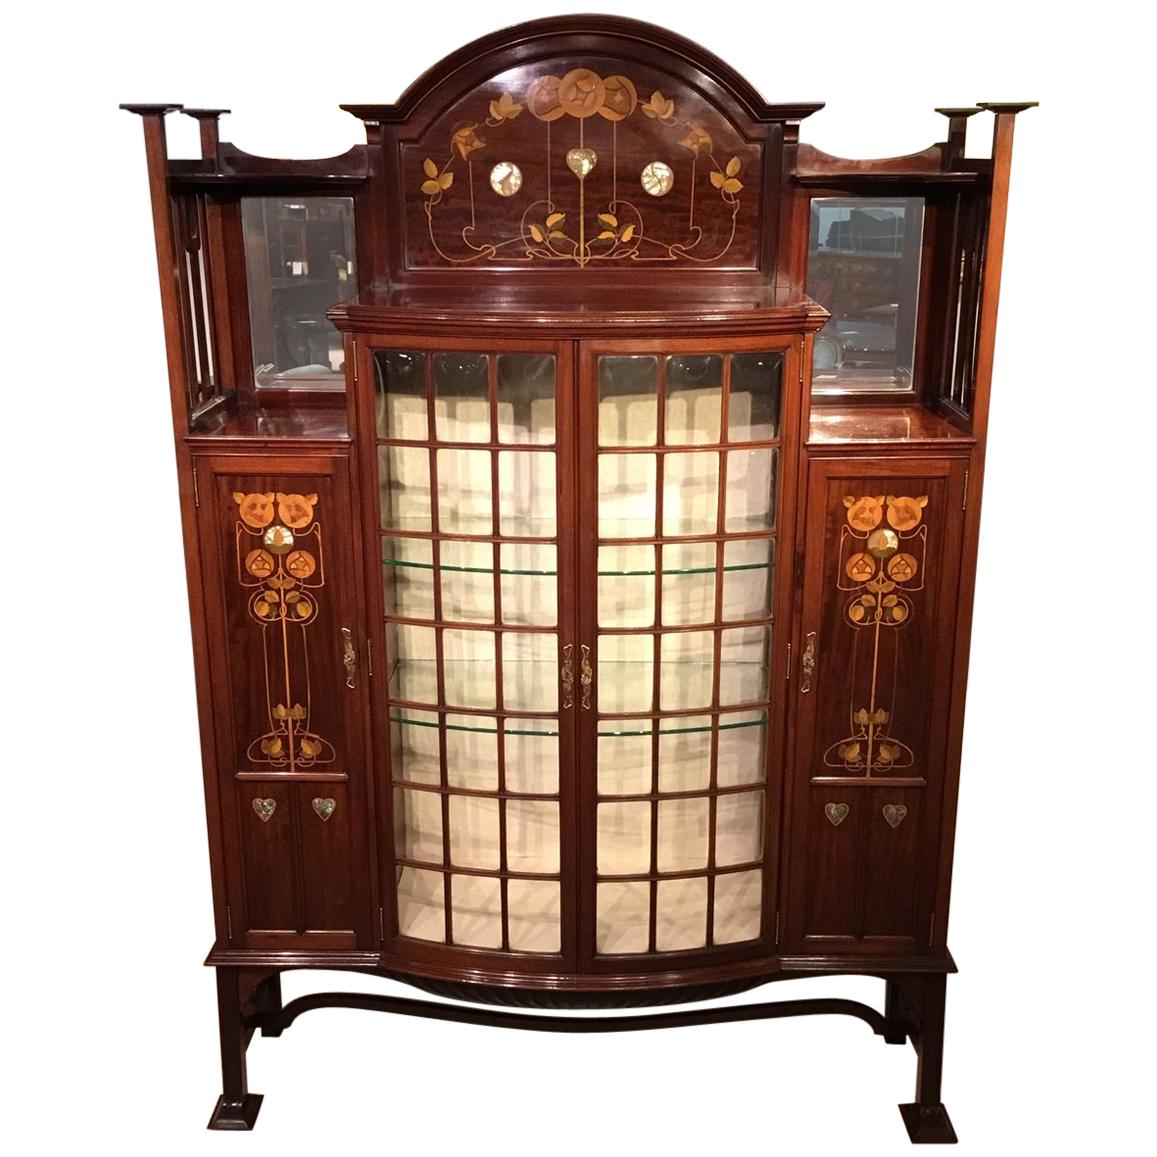 Mahogany Arts & Crafts Period Display Cabinet by Shapland & Petter